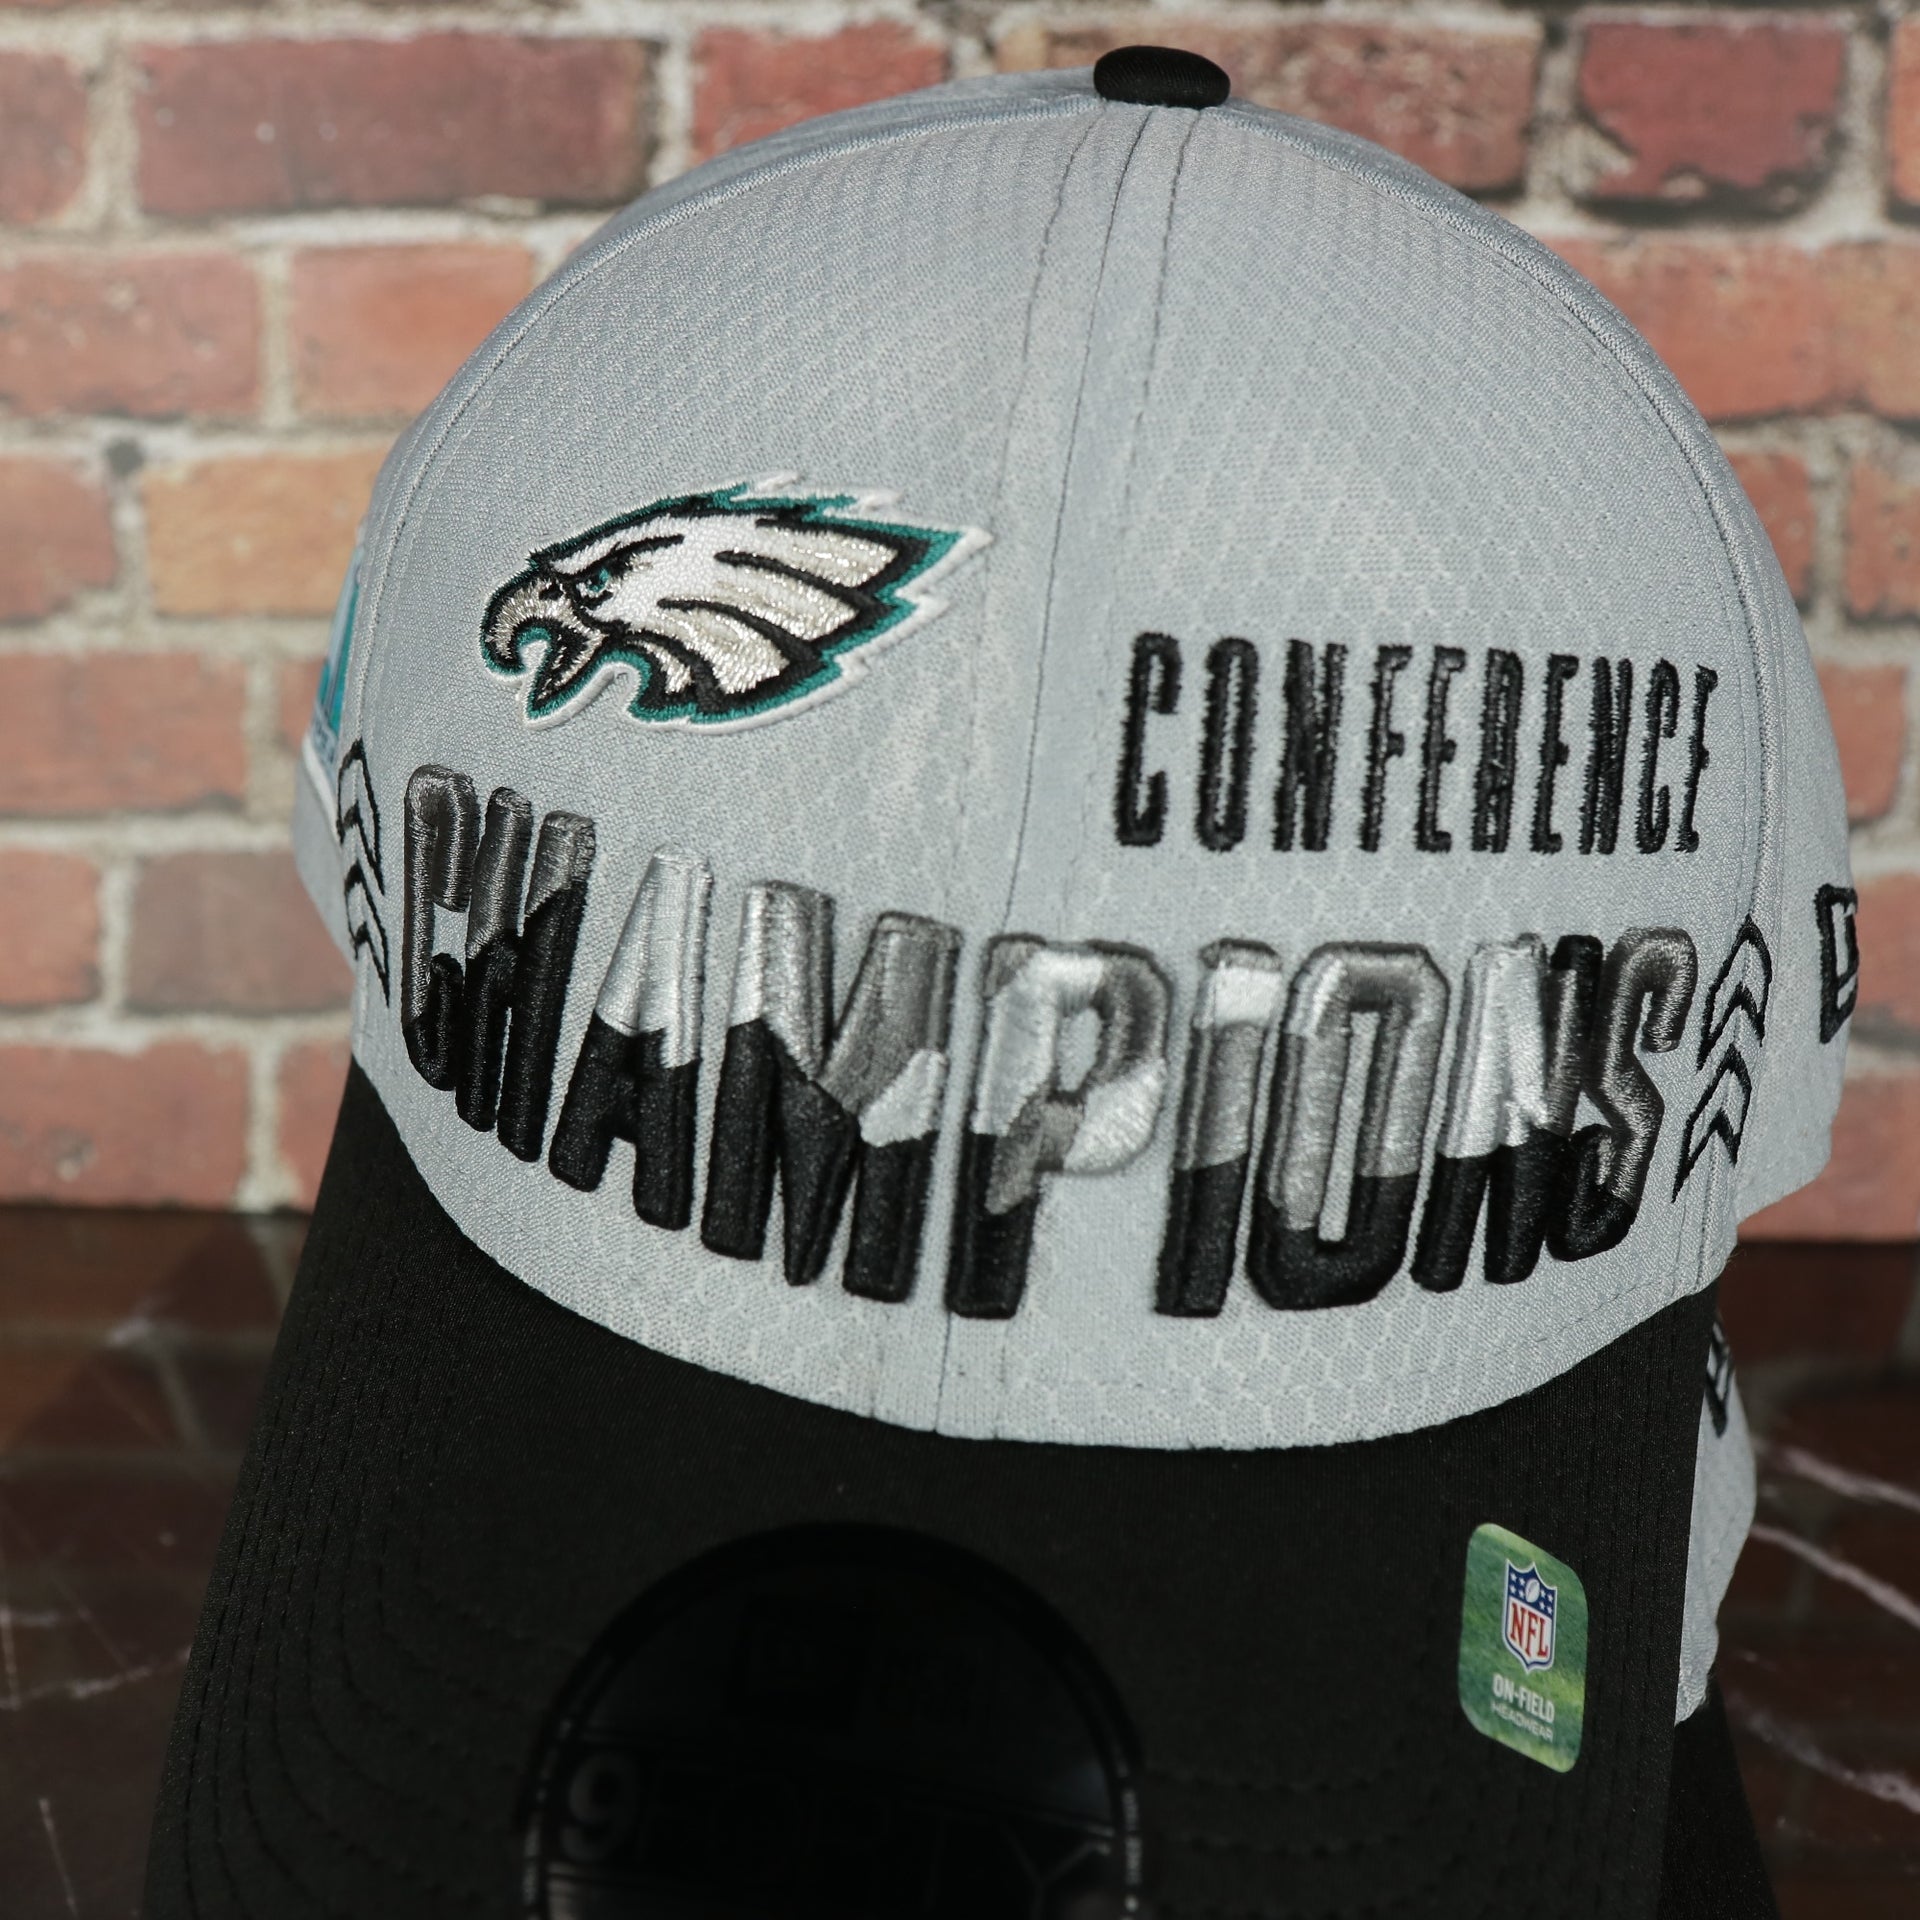 conference champion wordmark on the Philadelphia Eagles LVII Superbowl Conference Champions Two Tone Gray/Black 9Forty Dad Hat